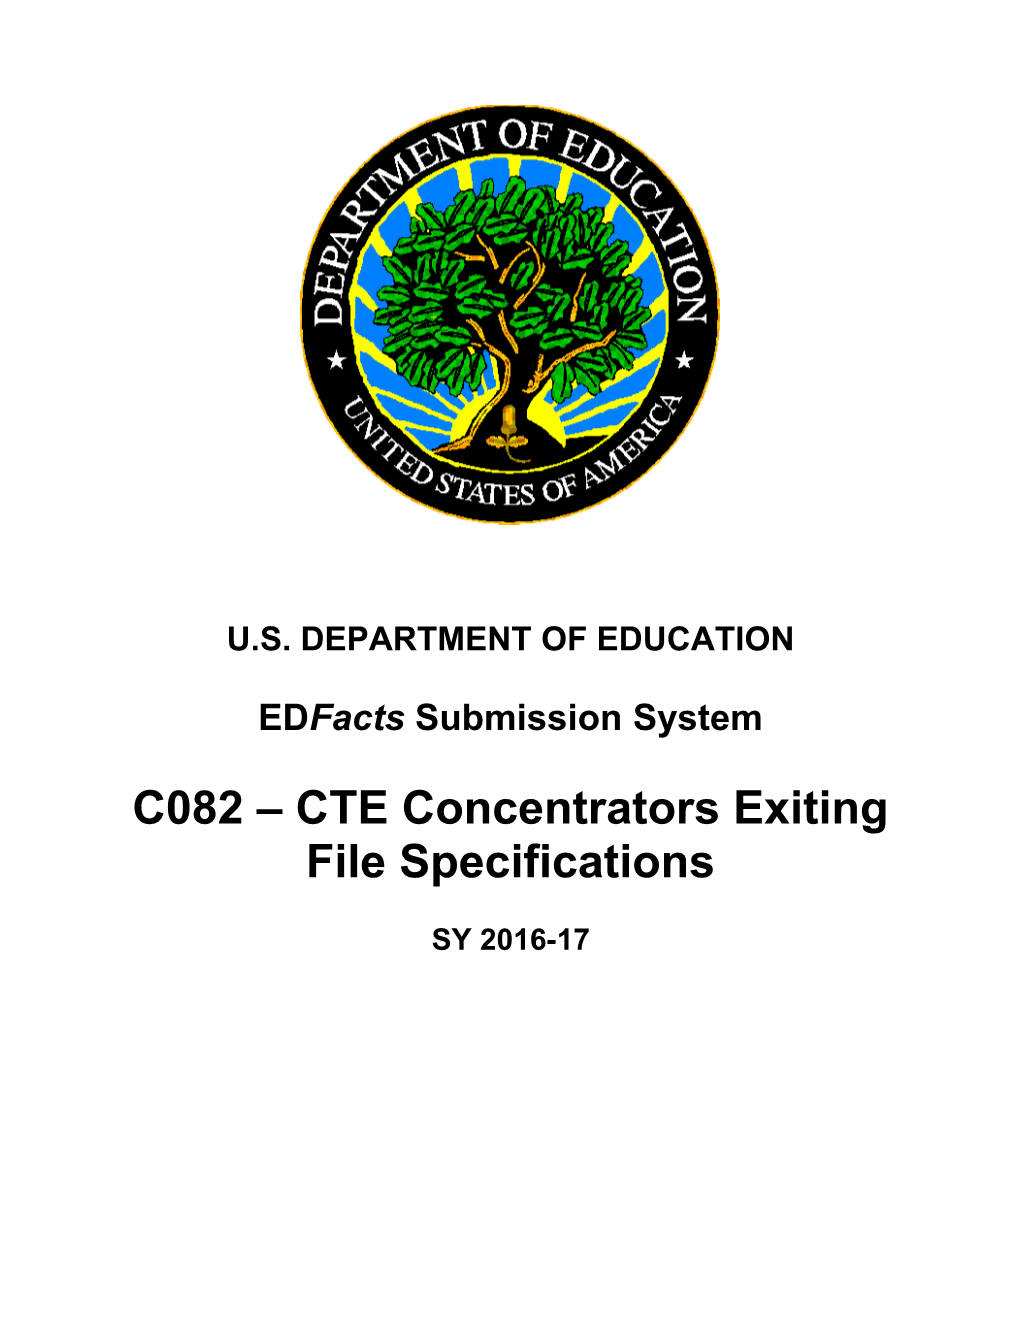 CTE Concentrators Exiting File Specifications (Msword)